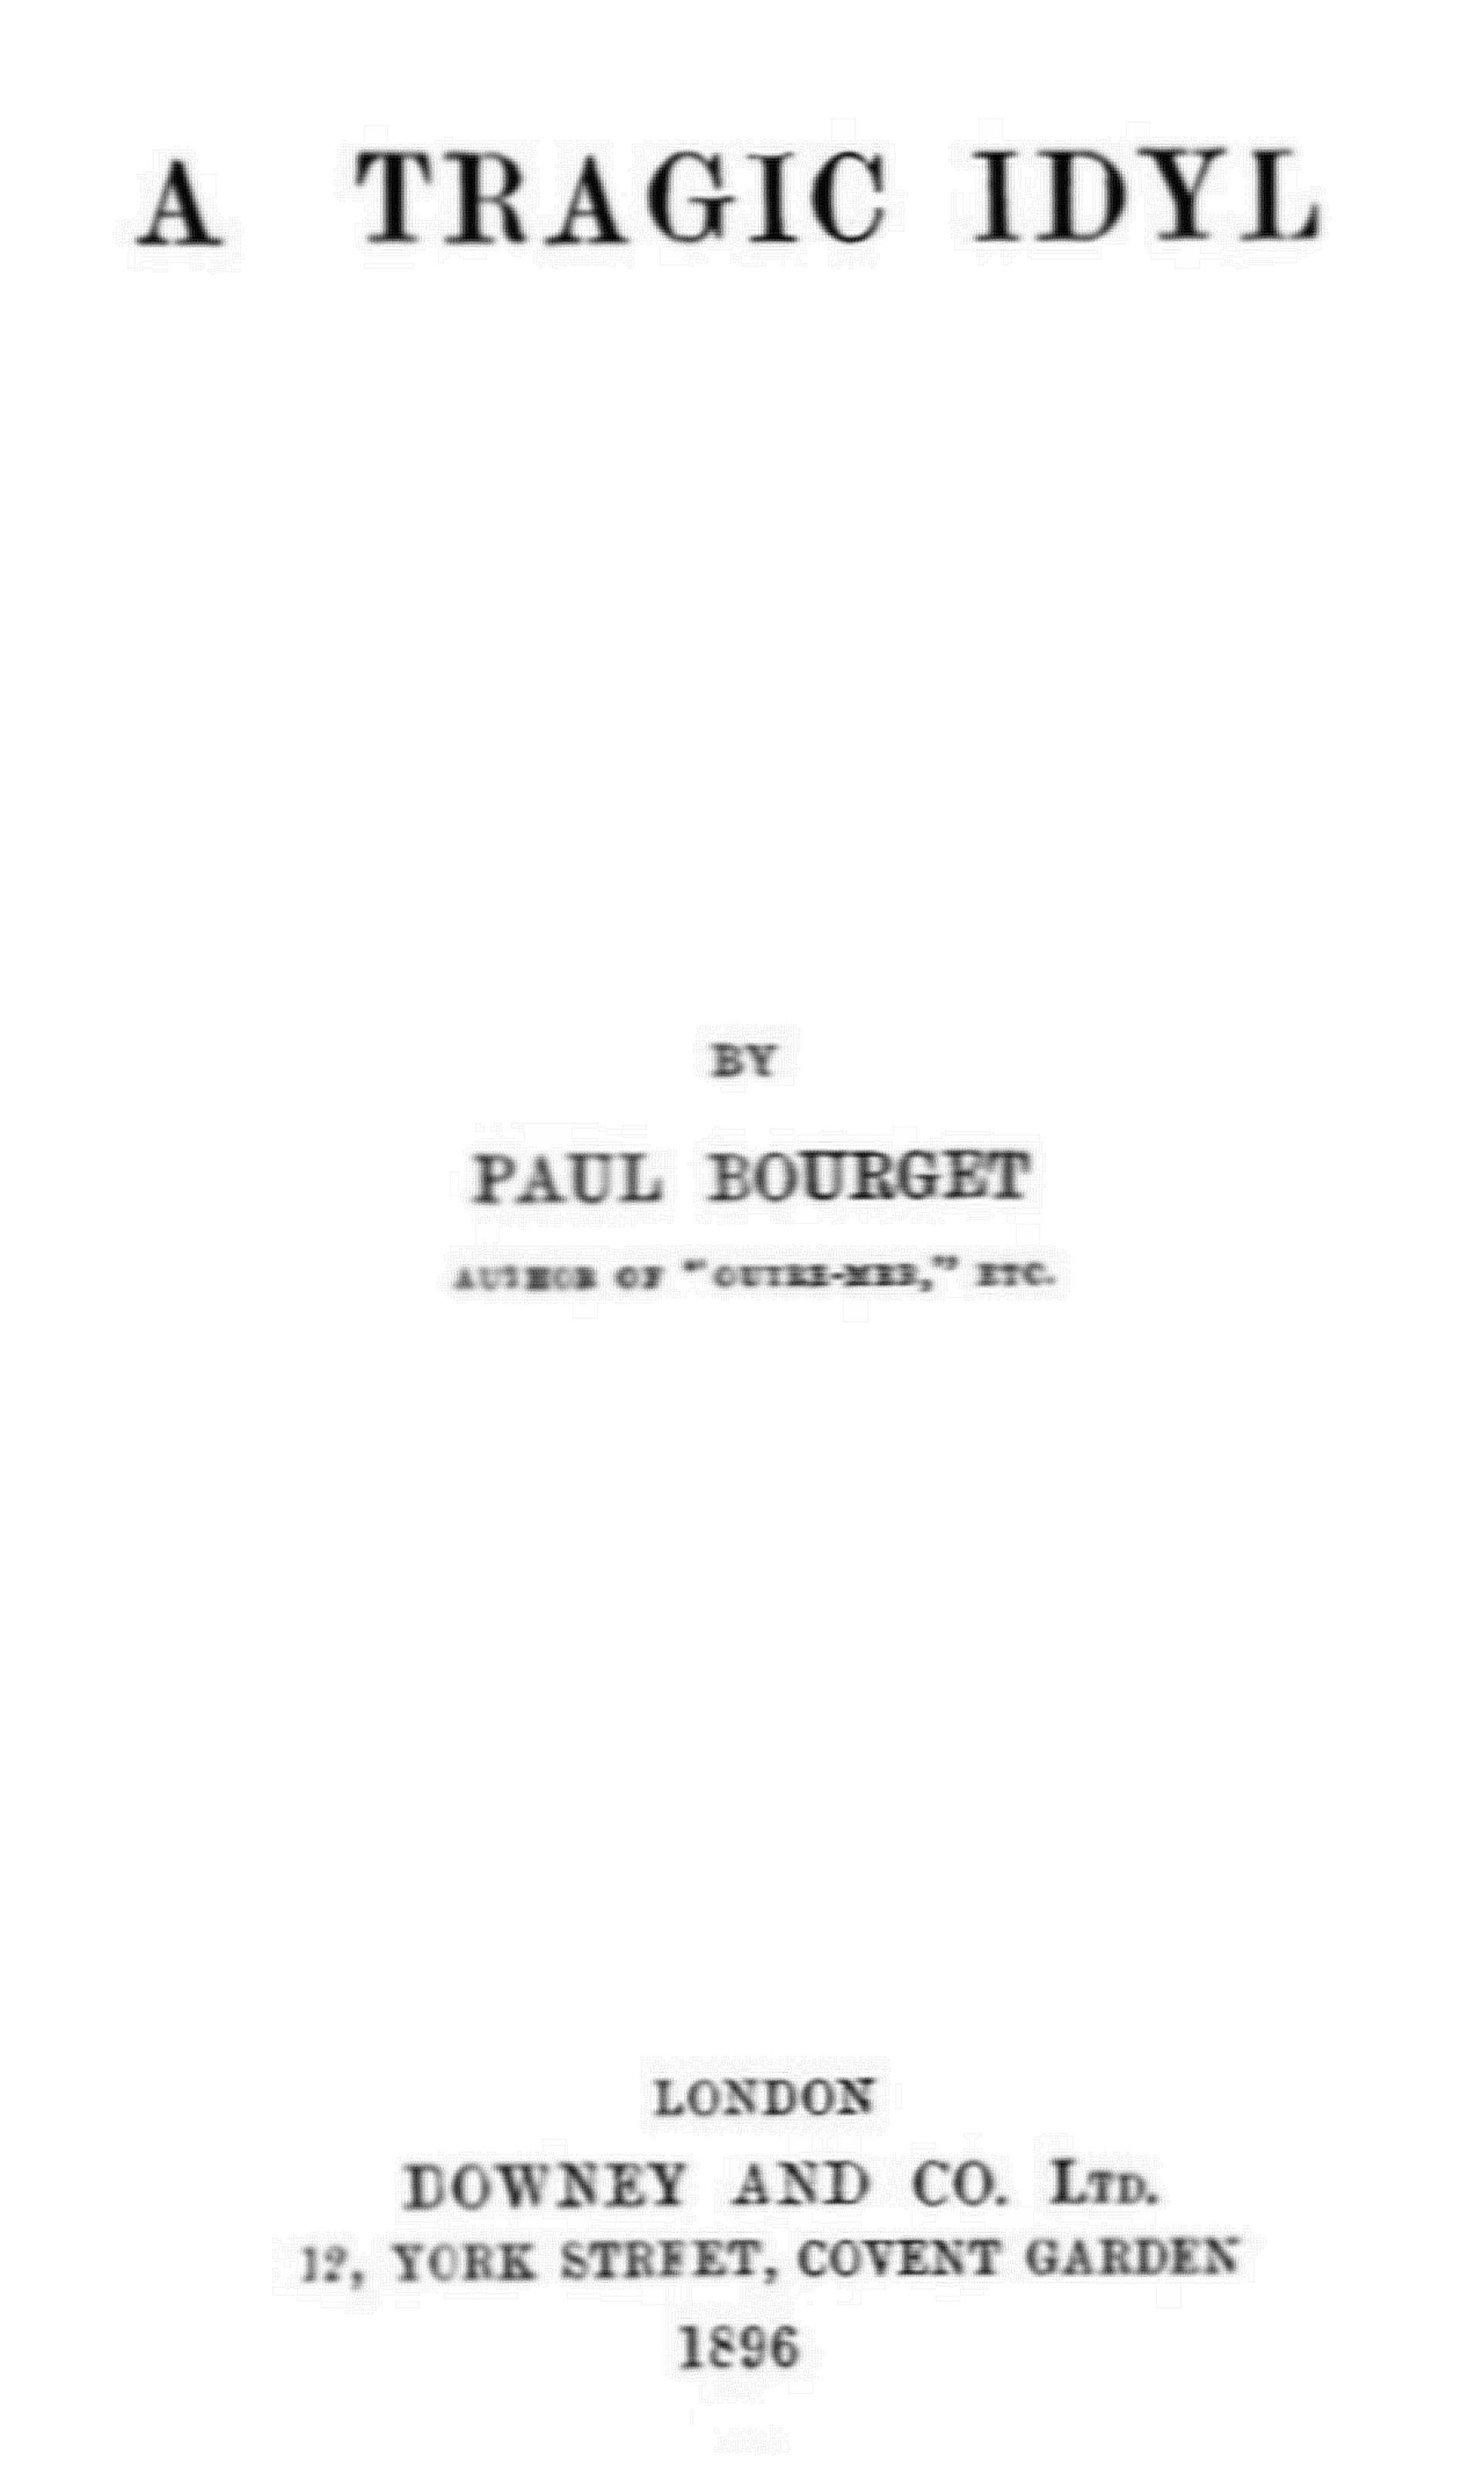 The Project Gutenberg eBook of A Tragic Idyl, by Paul Bourget.